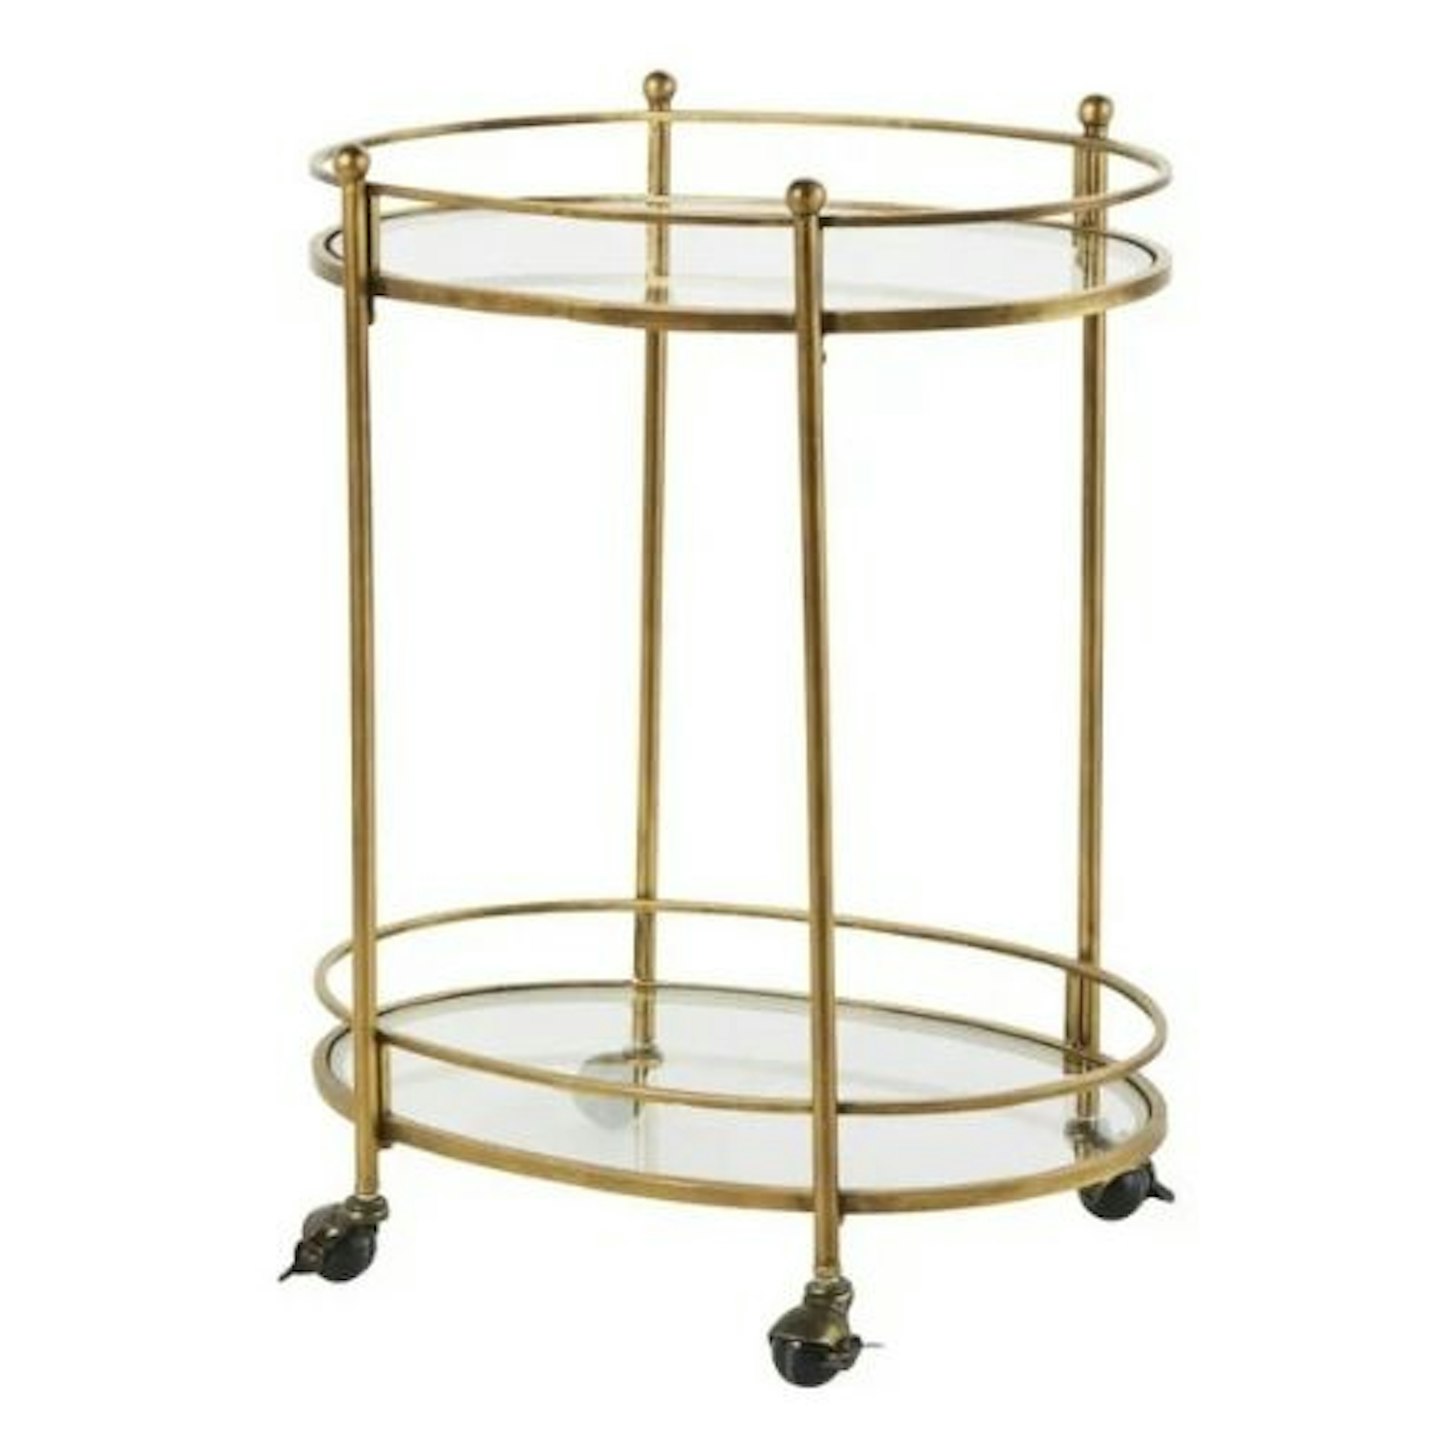 HIPPOLYTE Aged-Effect Brass Metal and Glass Serving Trolley